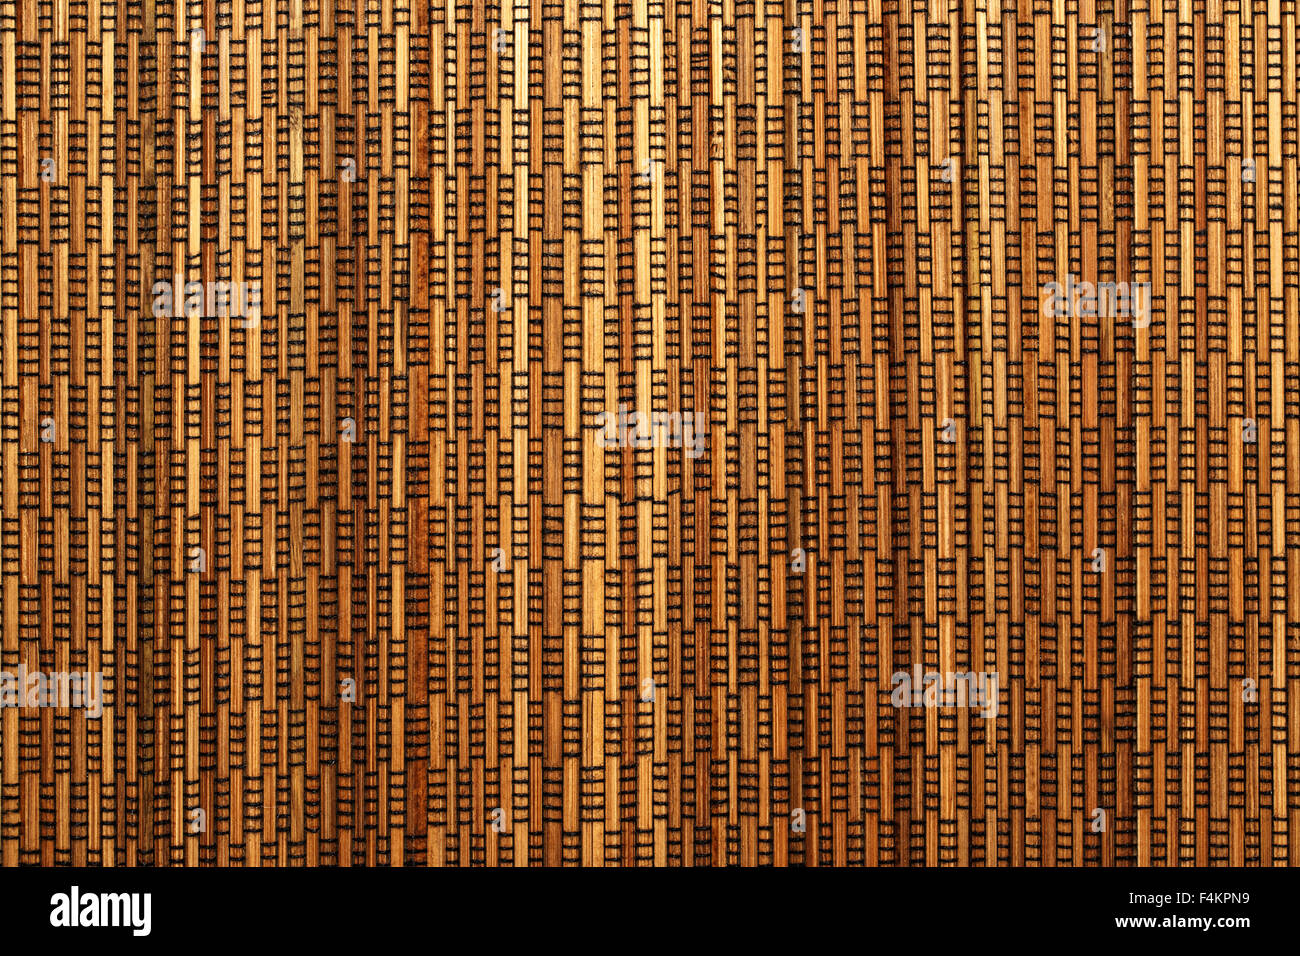 Brown wooden straw weaving surface as background Stock Photo